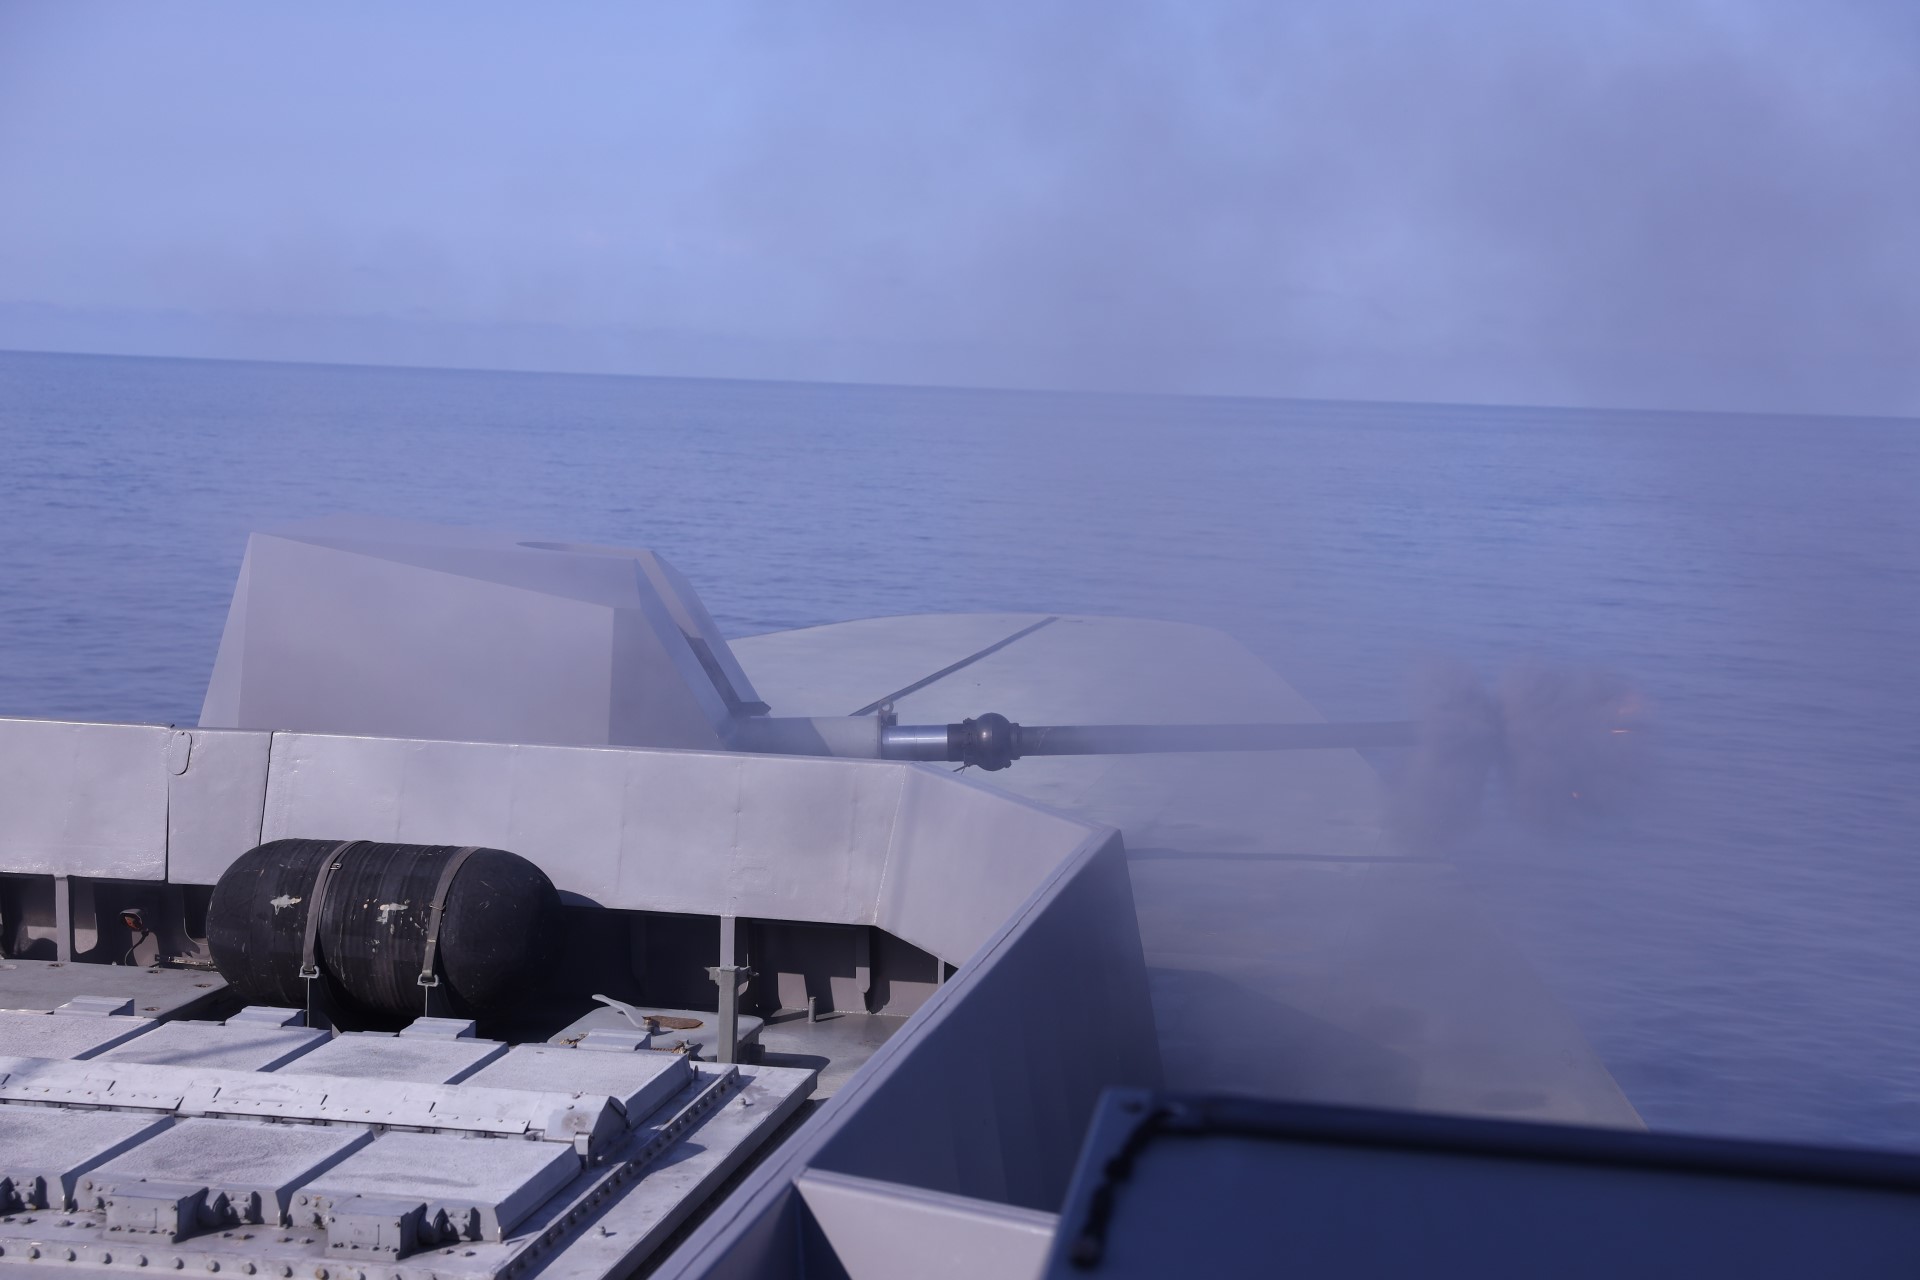 RSS Steadfast conducting a gunnery firing during the exercise.